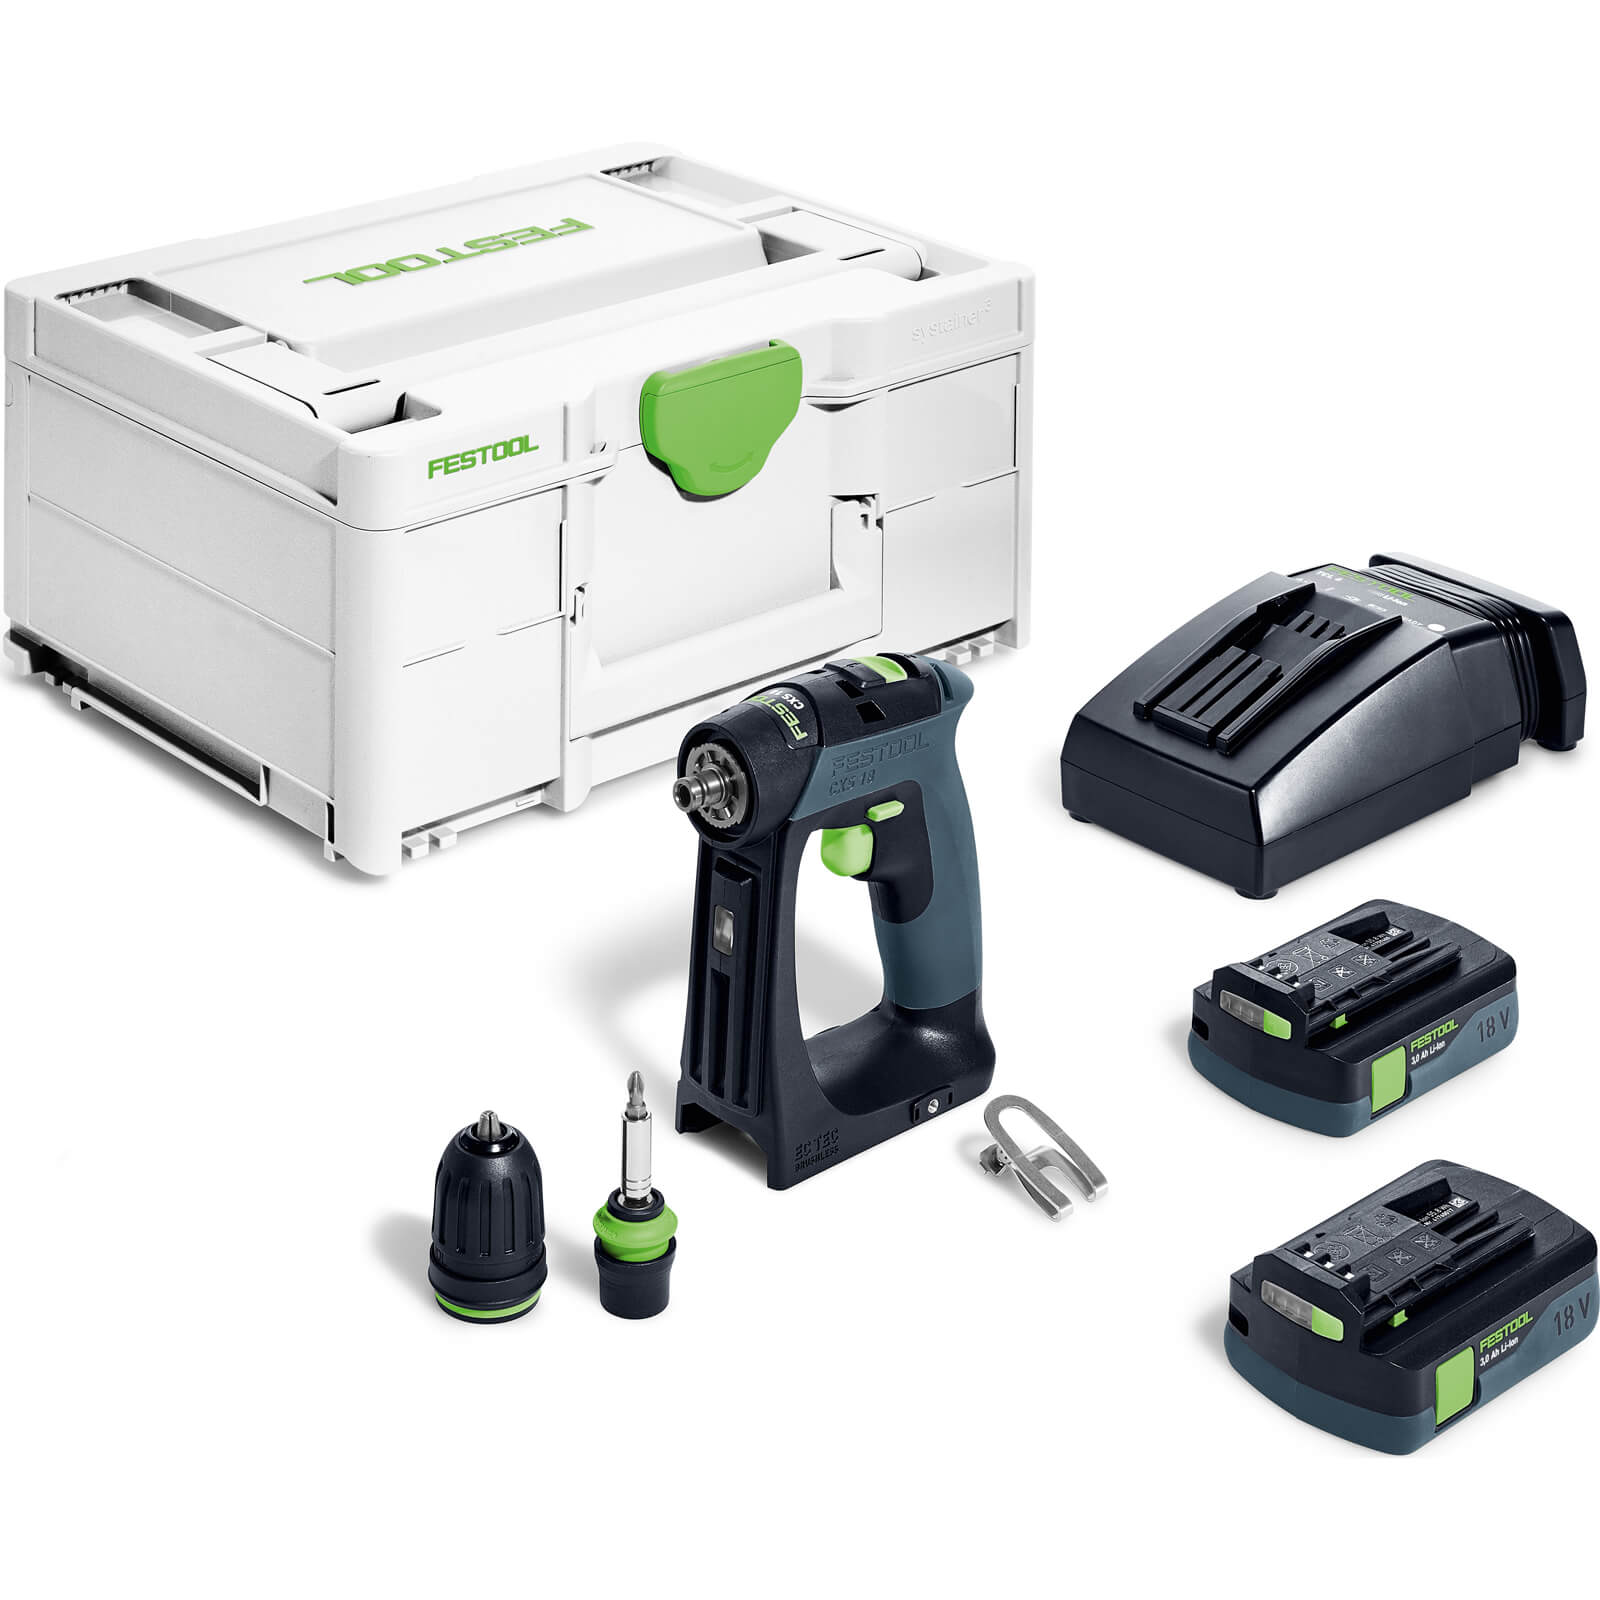 Image of Festool CXS 18 18v Cordless Brushless Drill Driver 2 x 3ah Li-ion Charger Case